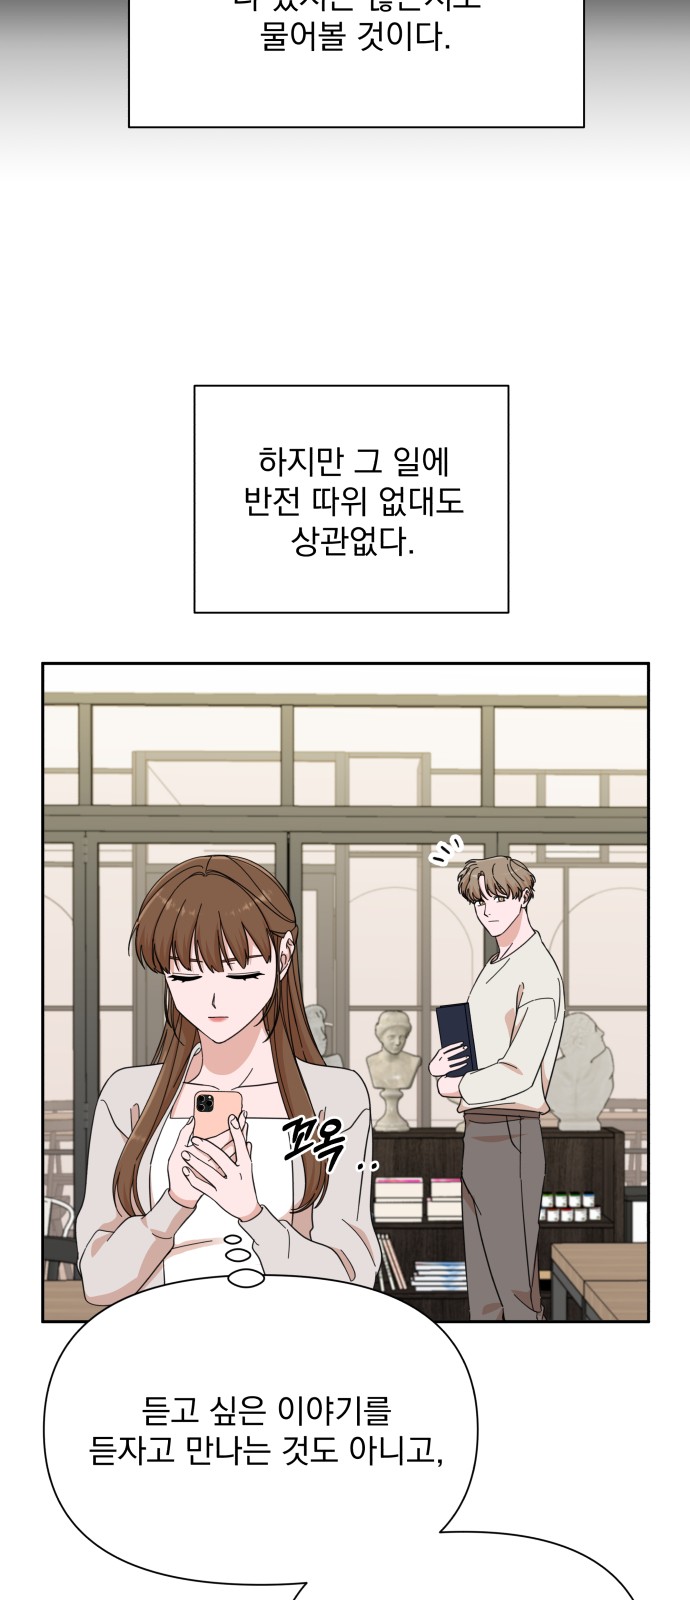 The Man With Pretty Lips - Chapter 48 - Page 4